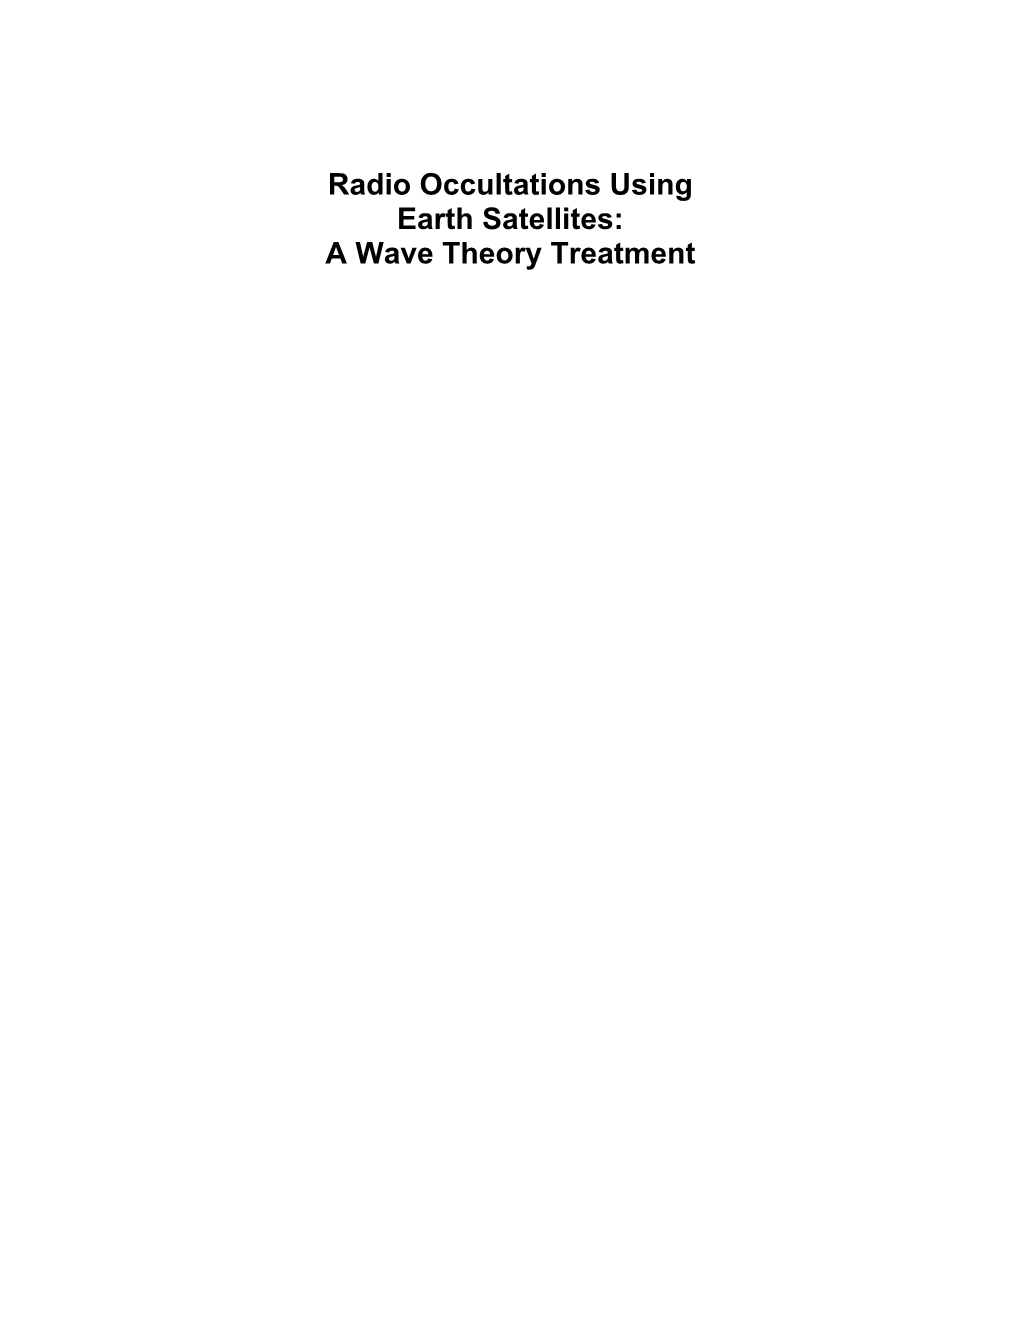 Radio Occultations Using Earth Satellites: a Wave Theory Treatment DEEP SPACE COMMUNICATIONS and NAVIGATION SERIES